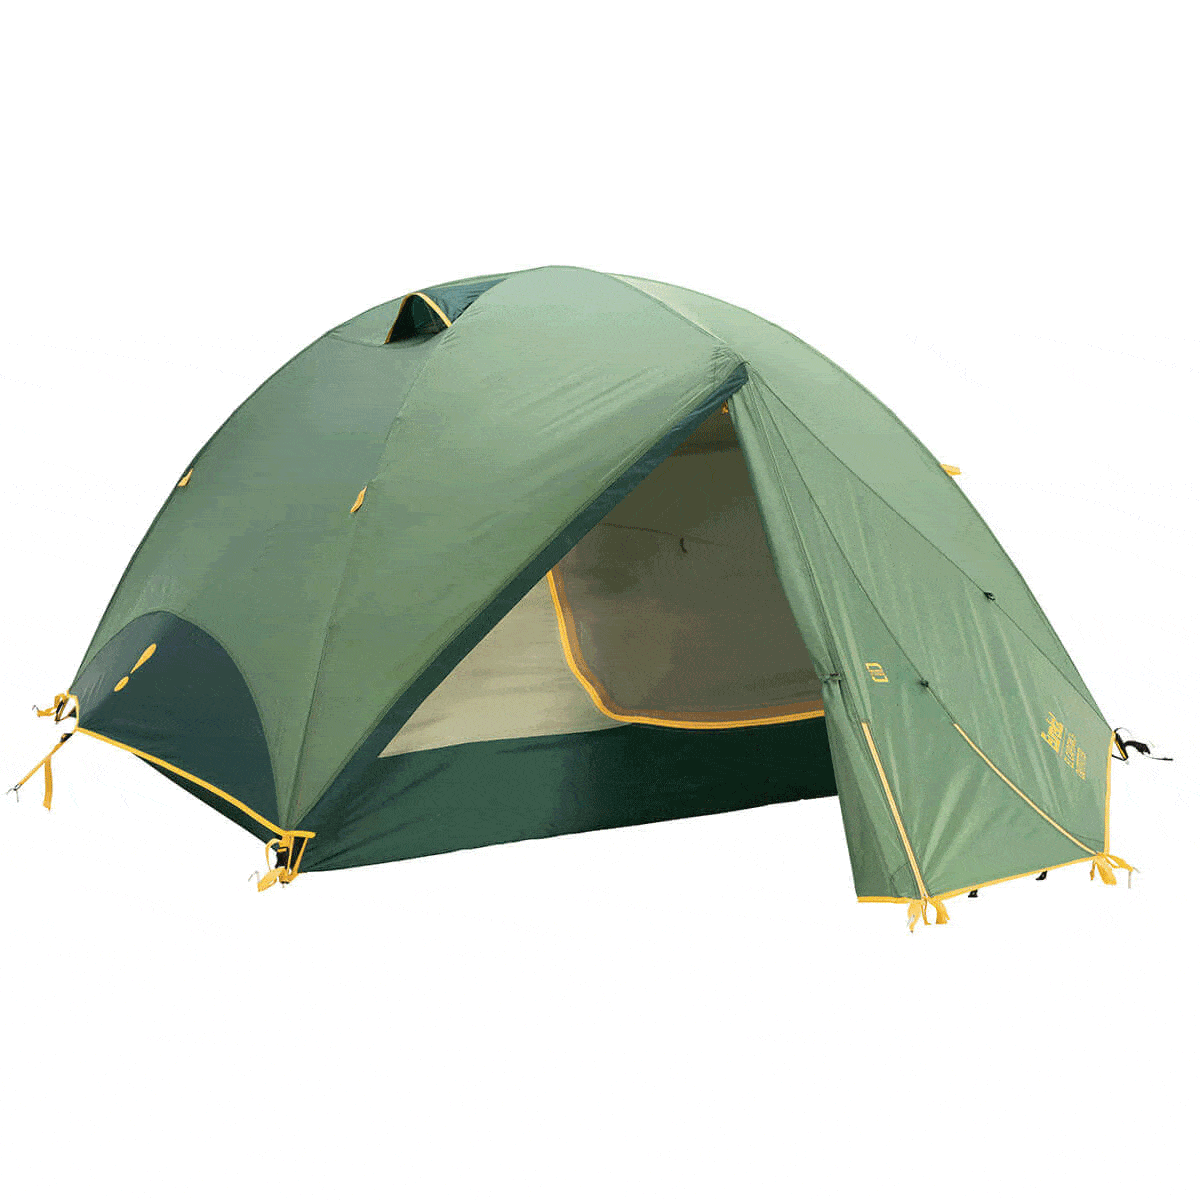 Eureka! El Capitan 3+ Outfitter Tent with rainfly on and door opening